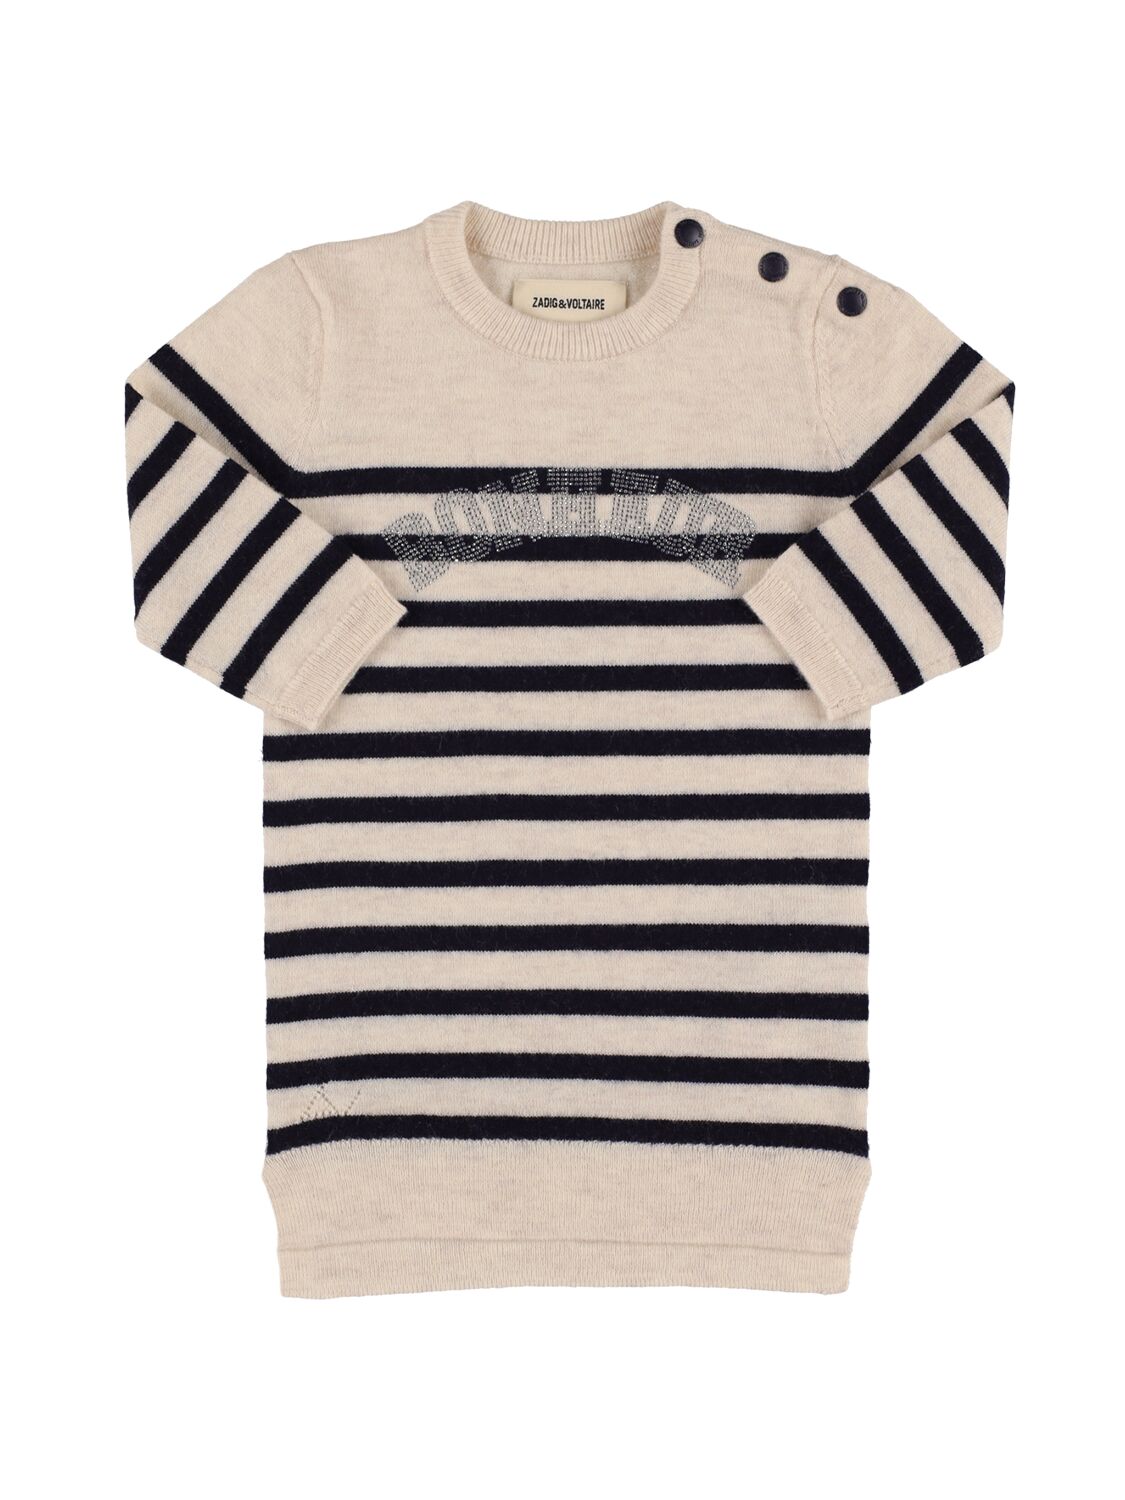 Zadig & Voltaire Babies' Striped Wool & Cashmere Knit Dress In Off White,navy